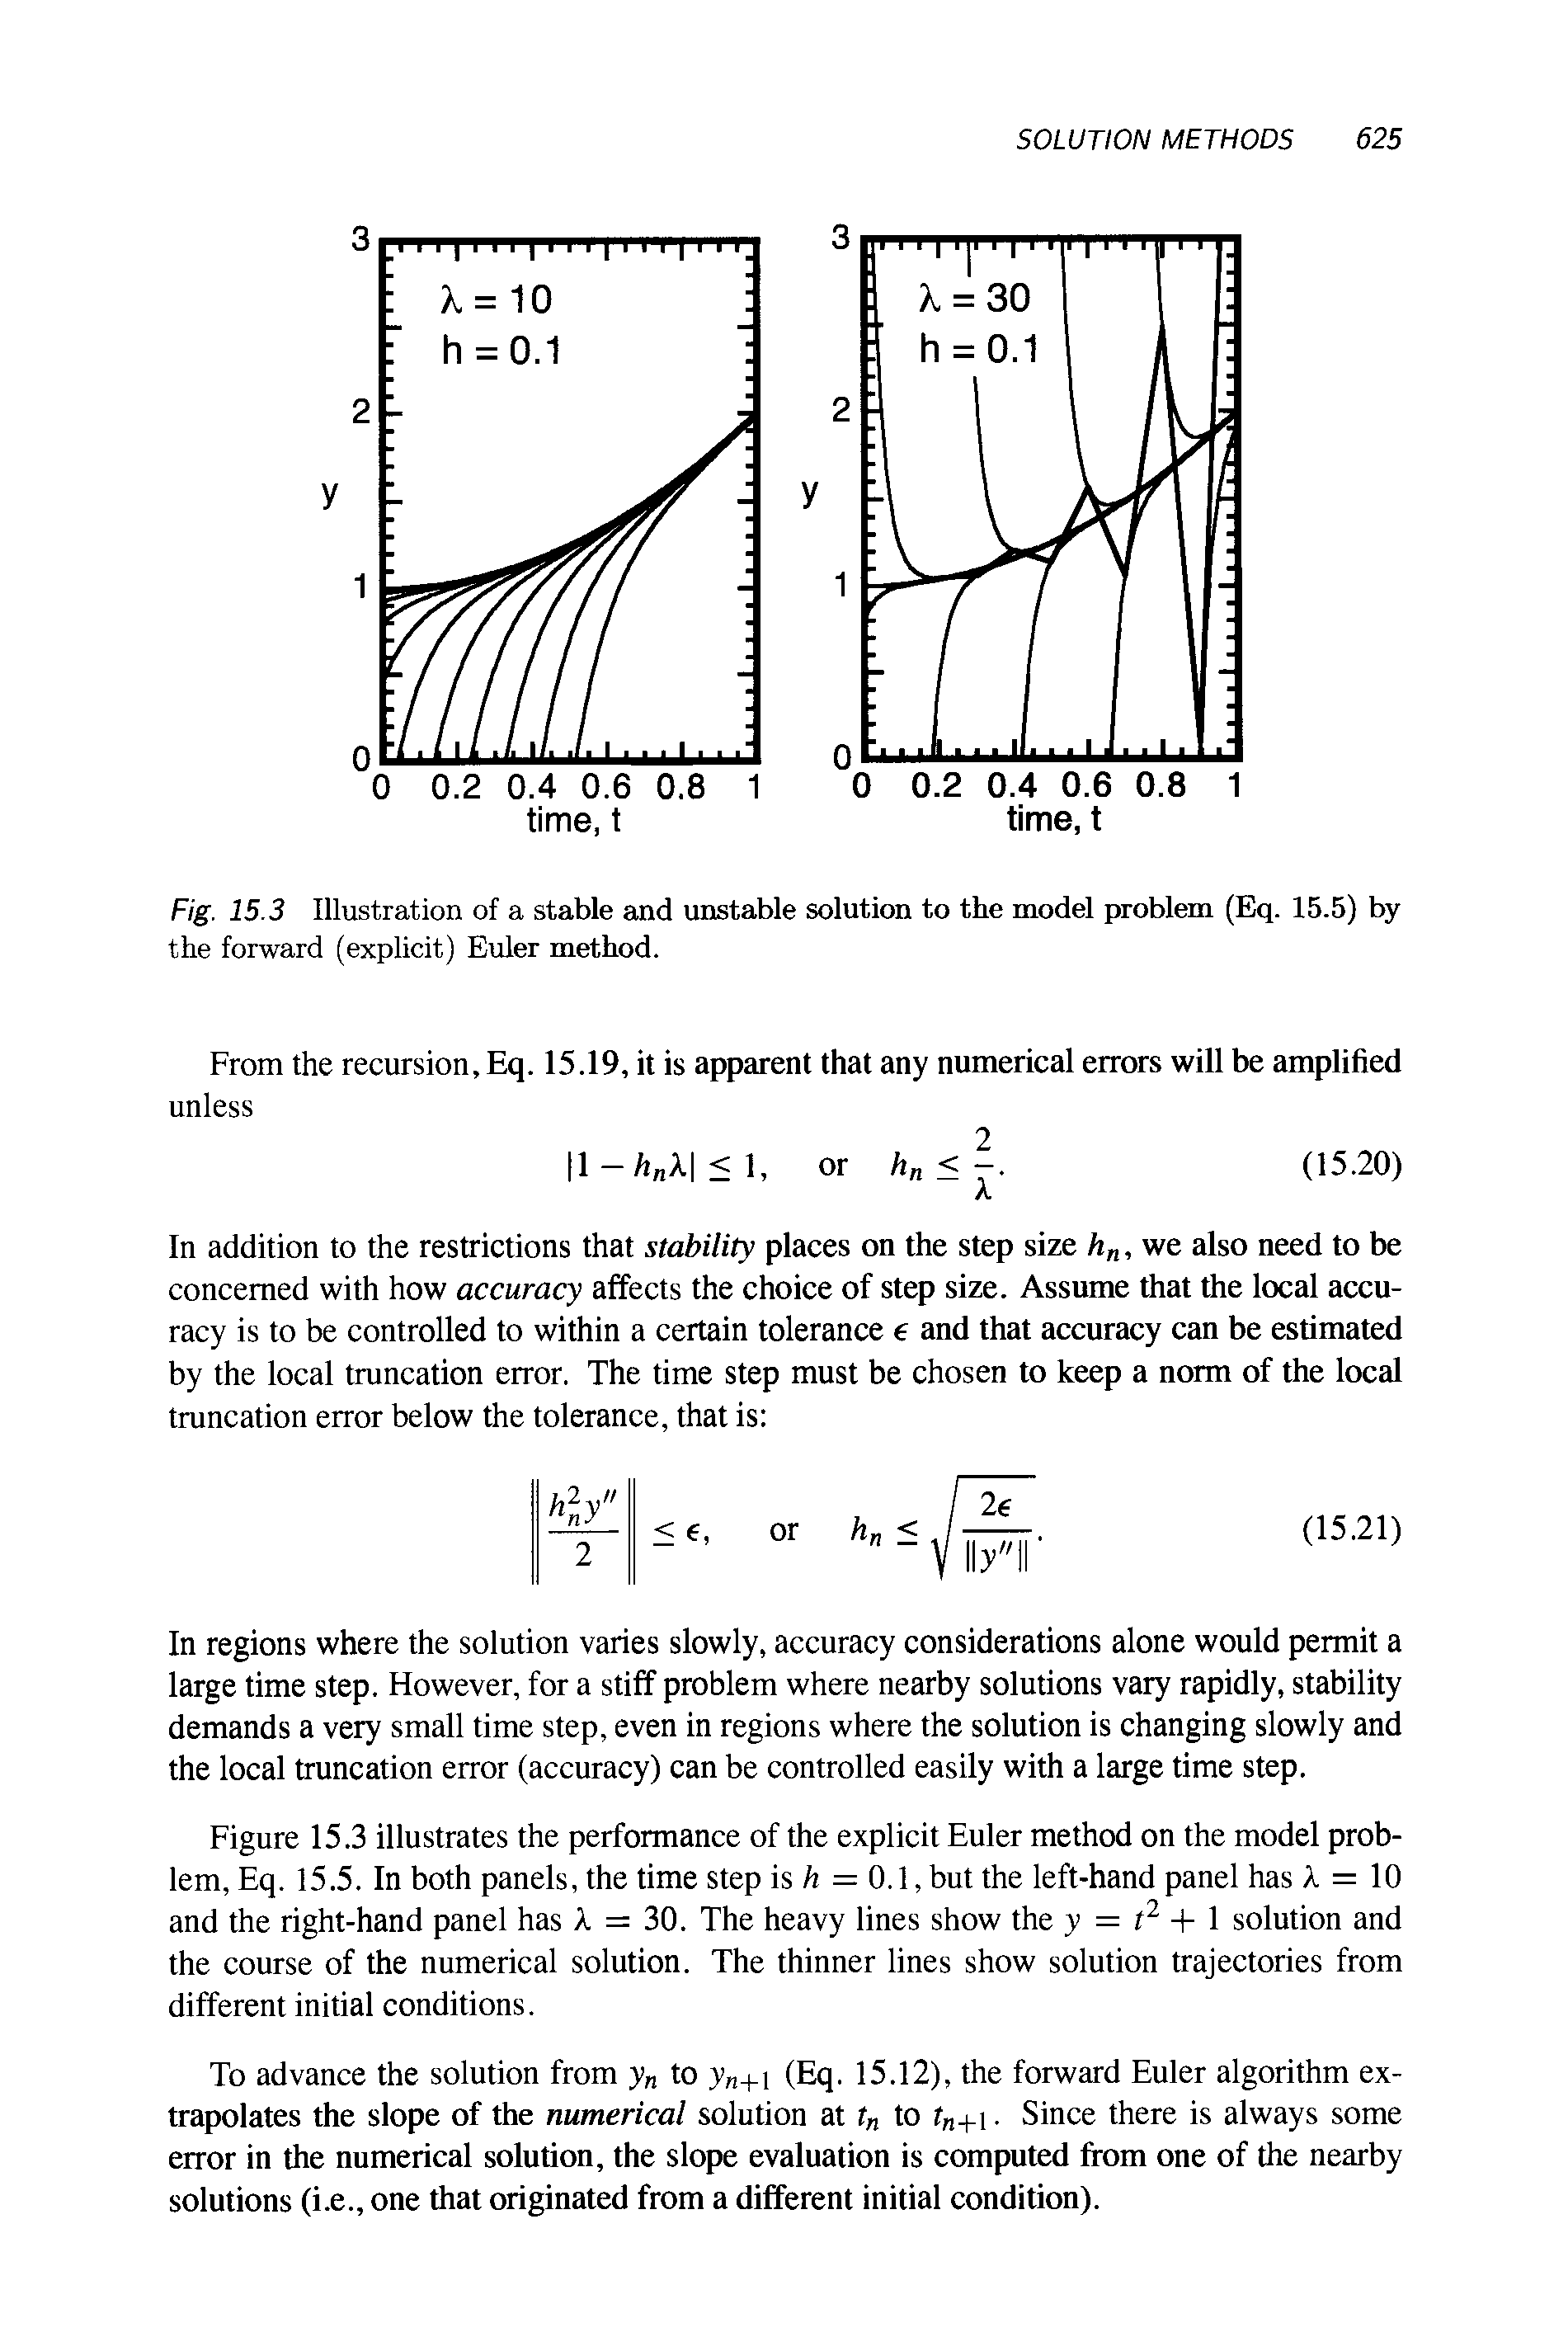 Fig. 15.3 Illustration of a stable and unstable solution to the model problem (Eq. 15.5) by the forward (explicit) Euler method.